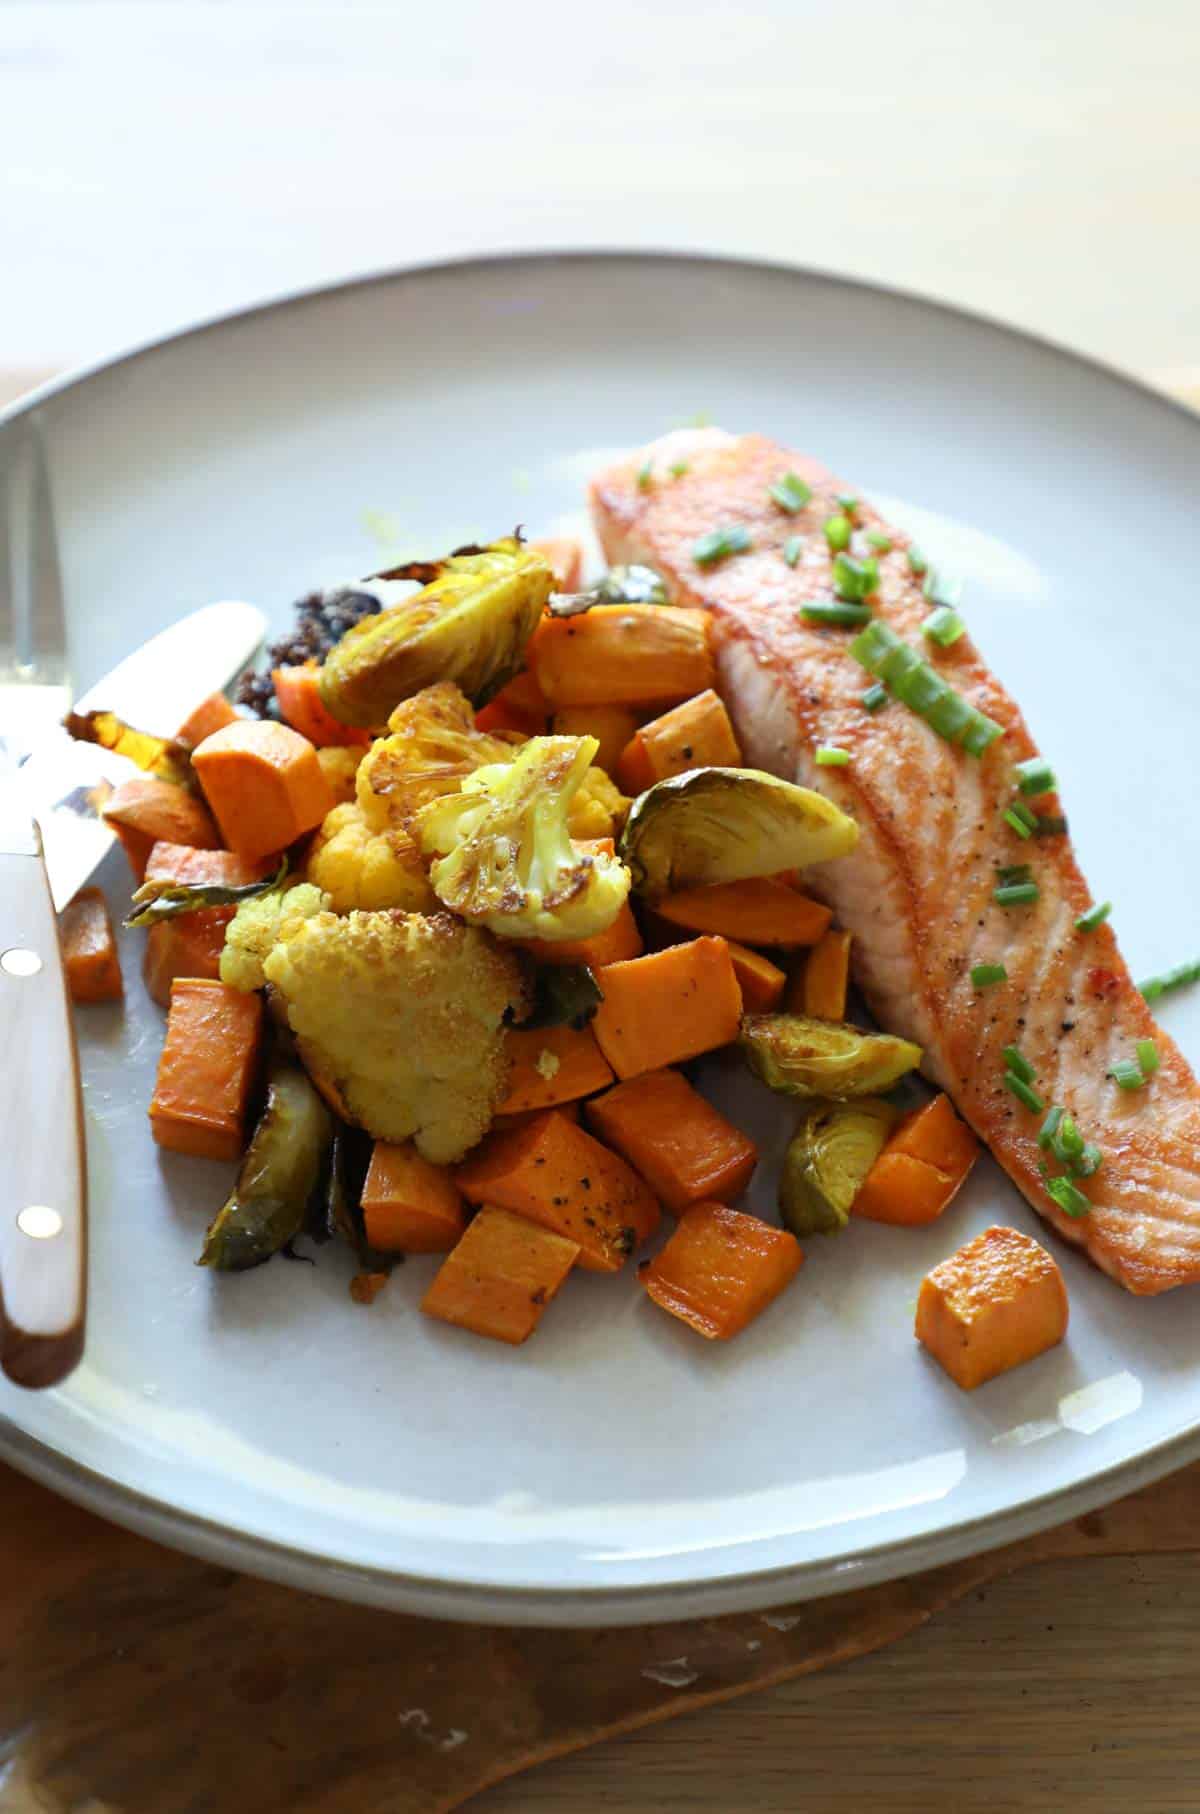 Healthy Salmon Dinner with Veggies on a Plate